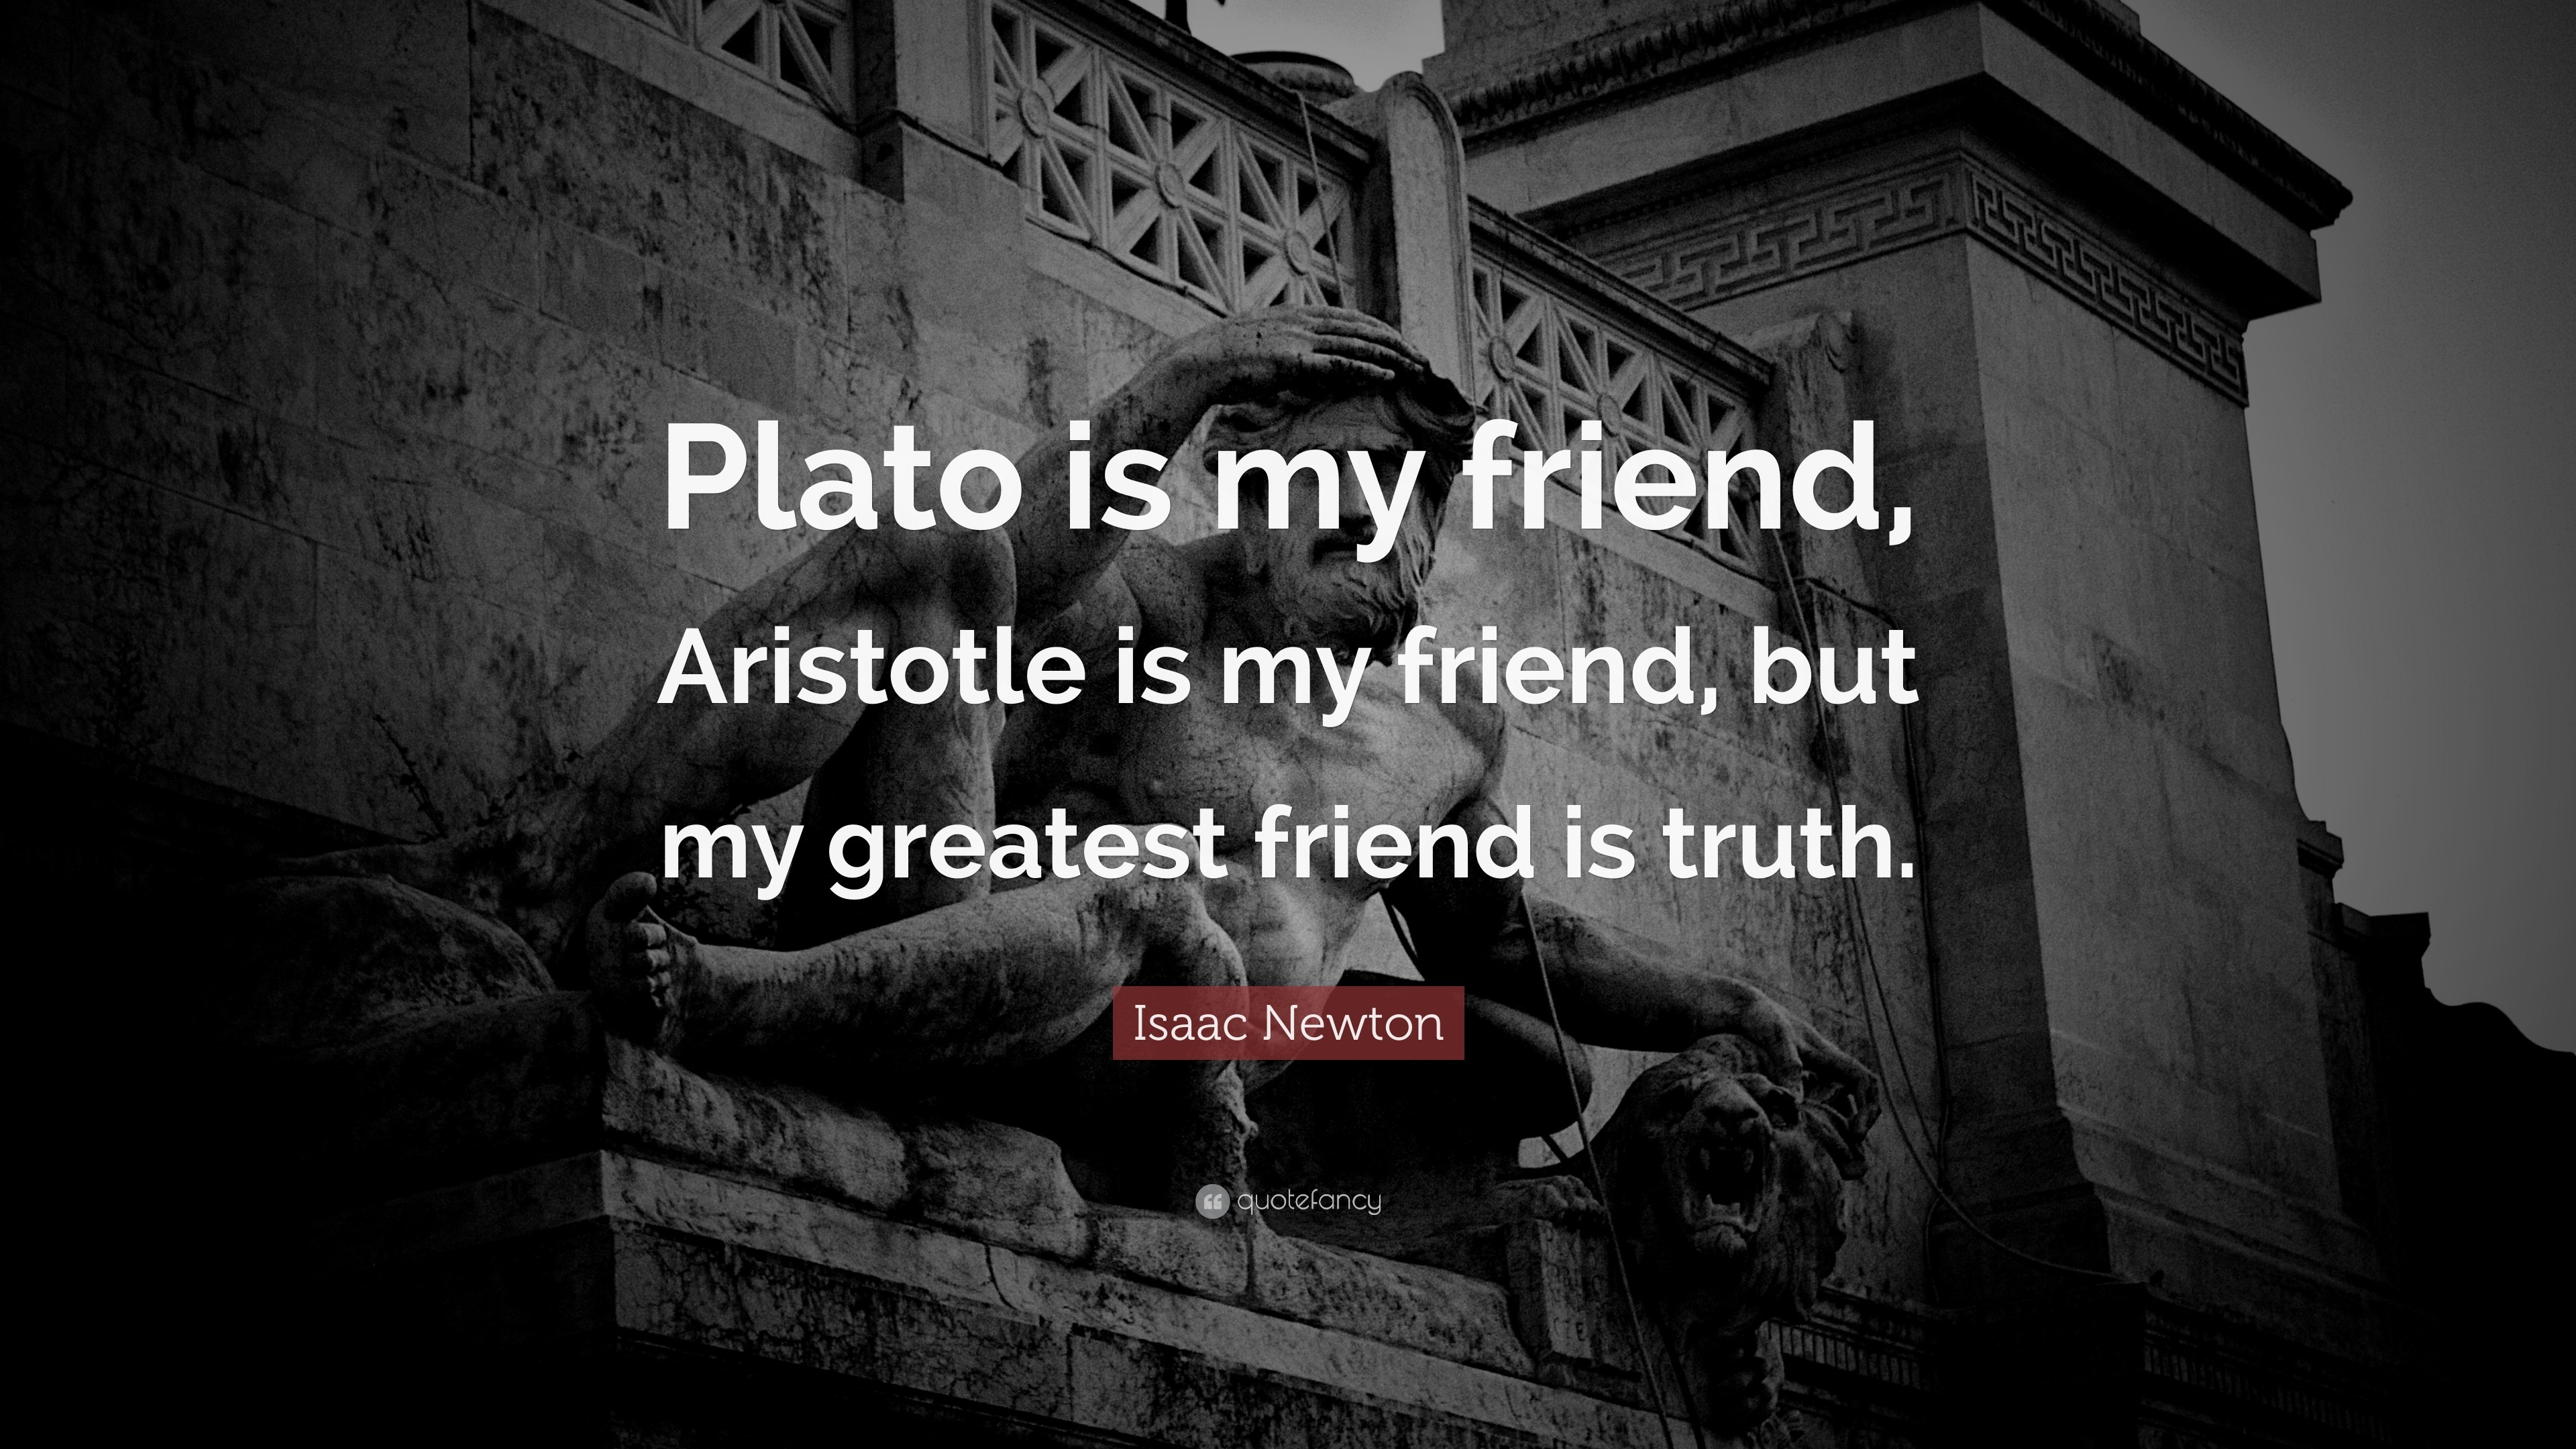 3840x2160 Isaac Newton Quote: “Plato is my friend, Aristotle is my friend, but